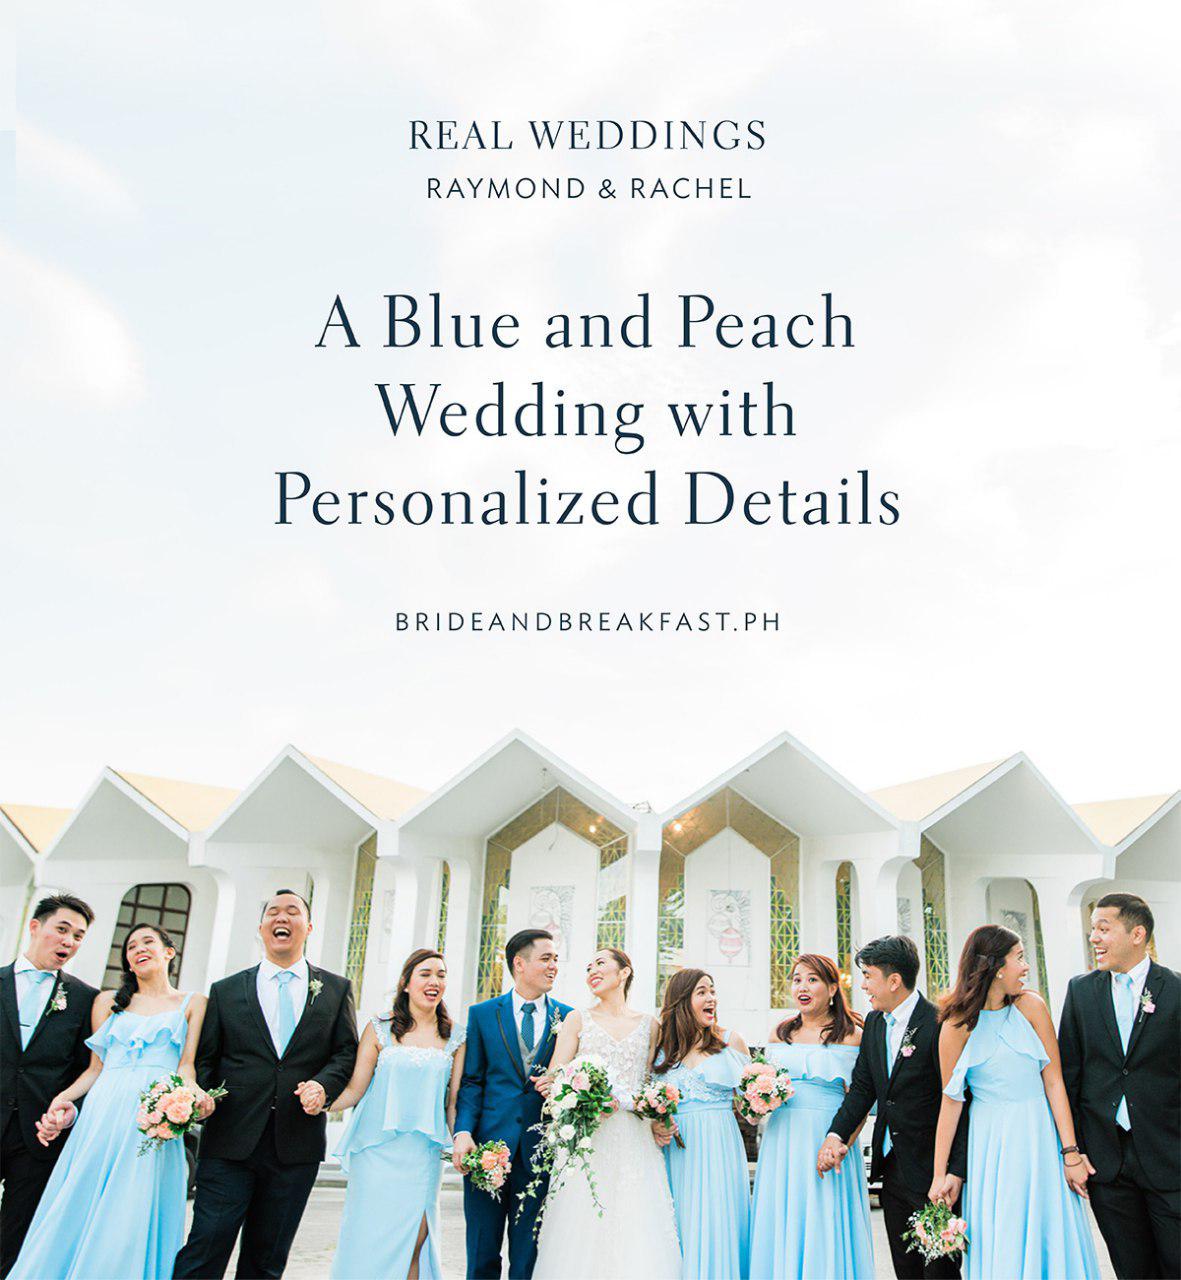 A Blue and Peach Wedding with Personalized Details